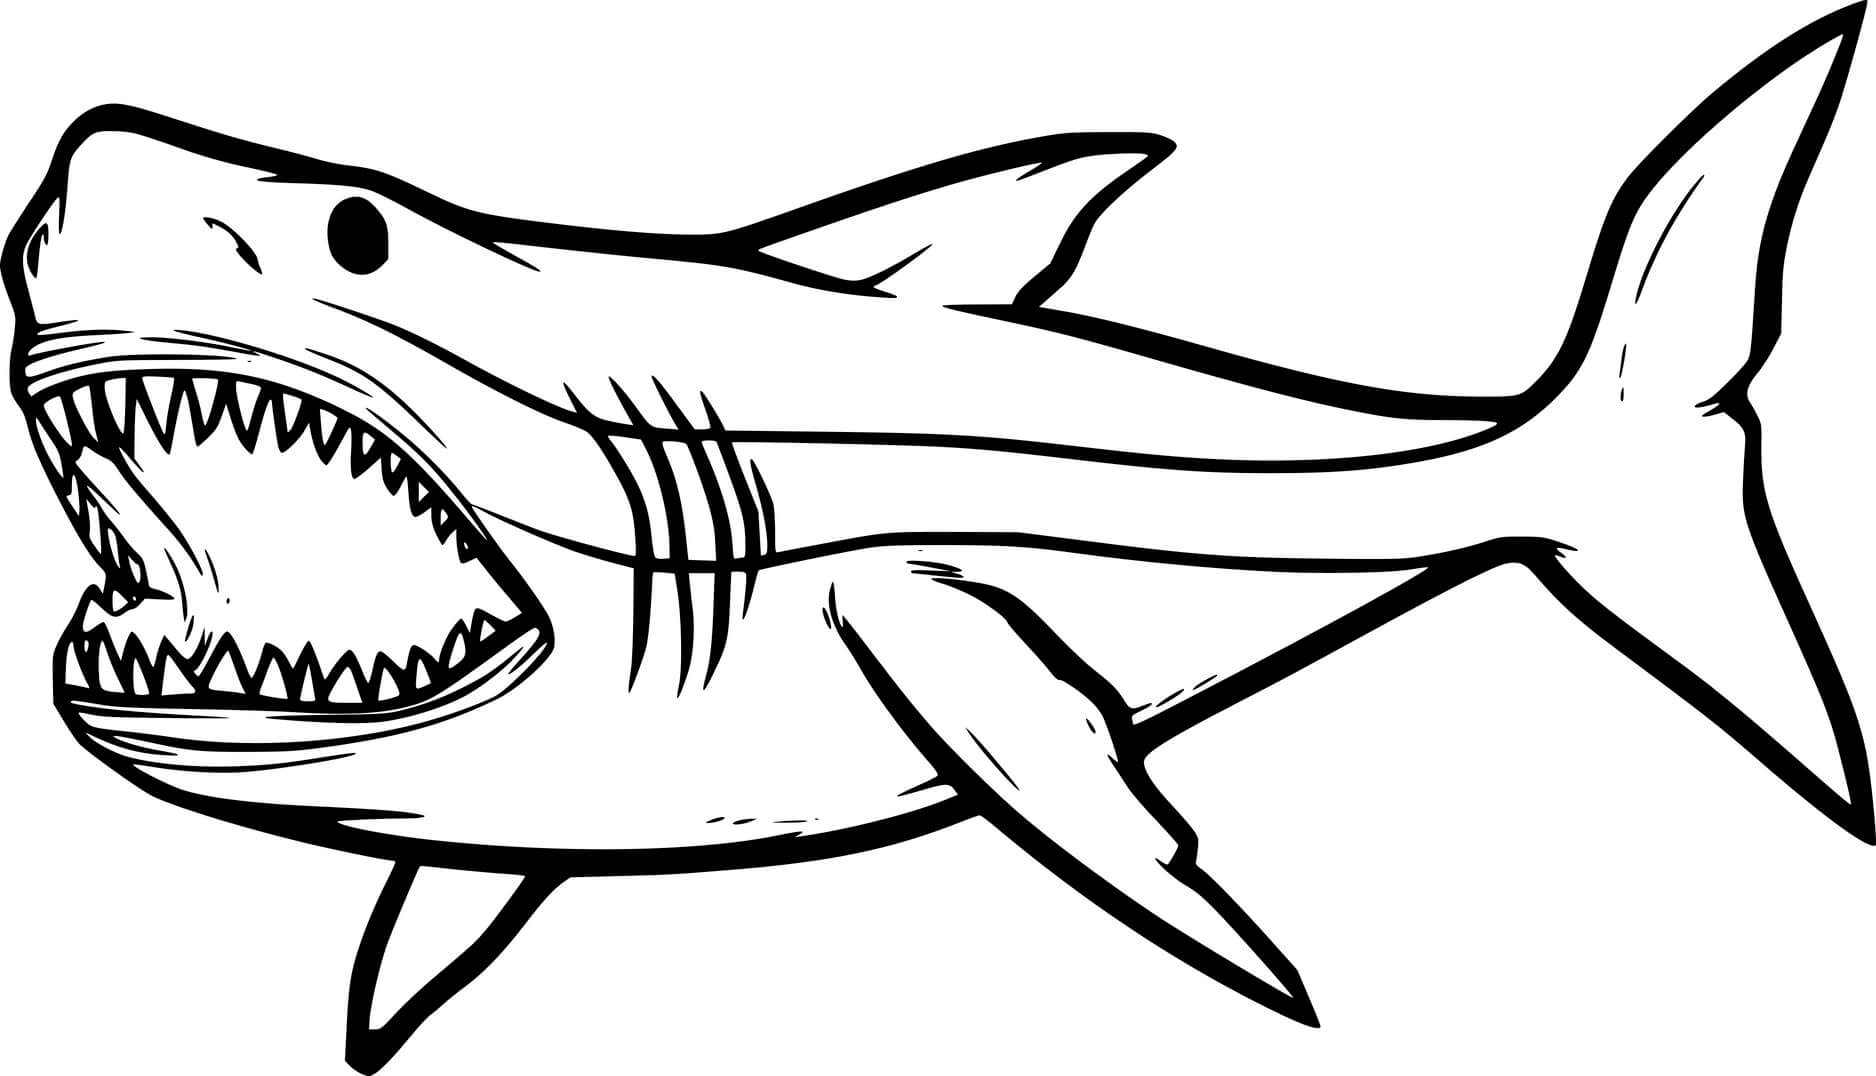 Swimming Megalodon Shark Coloring Page